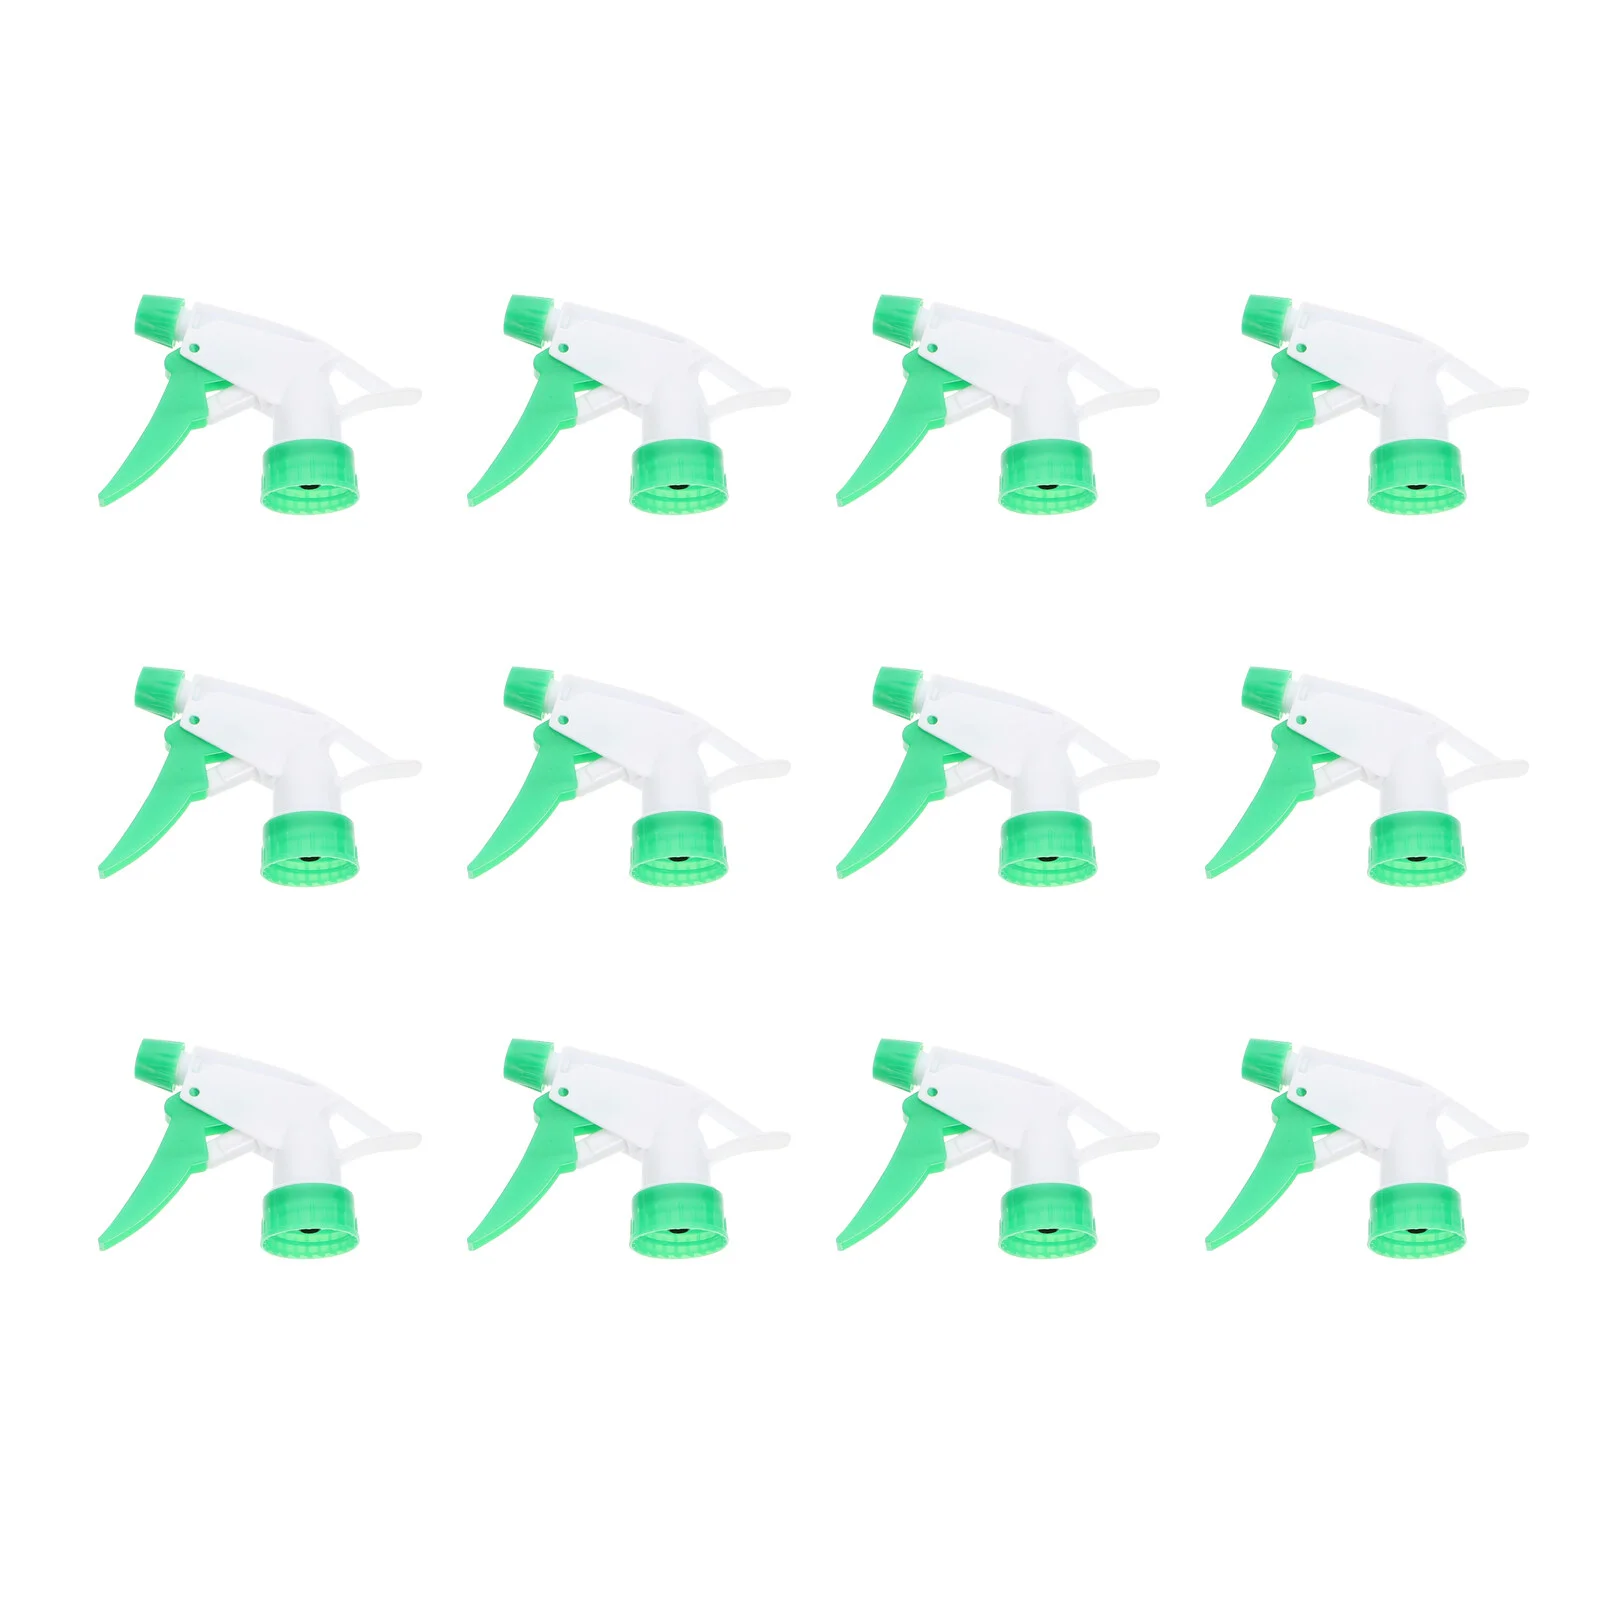 

15 Pcs Nozzle Plastic Water Bottle Plastic Bottle Sprayer Replacement Trigger Heads Watering Tools Gardening Nozzles